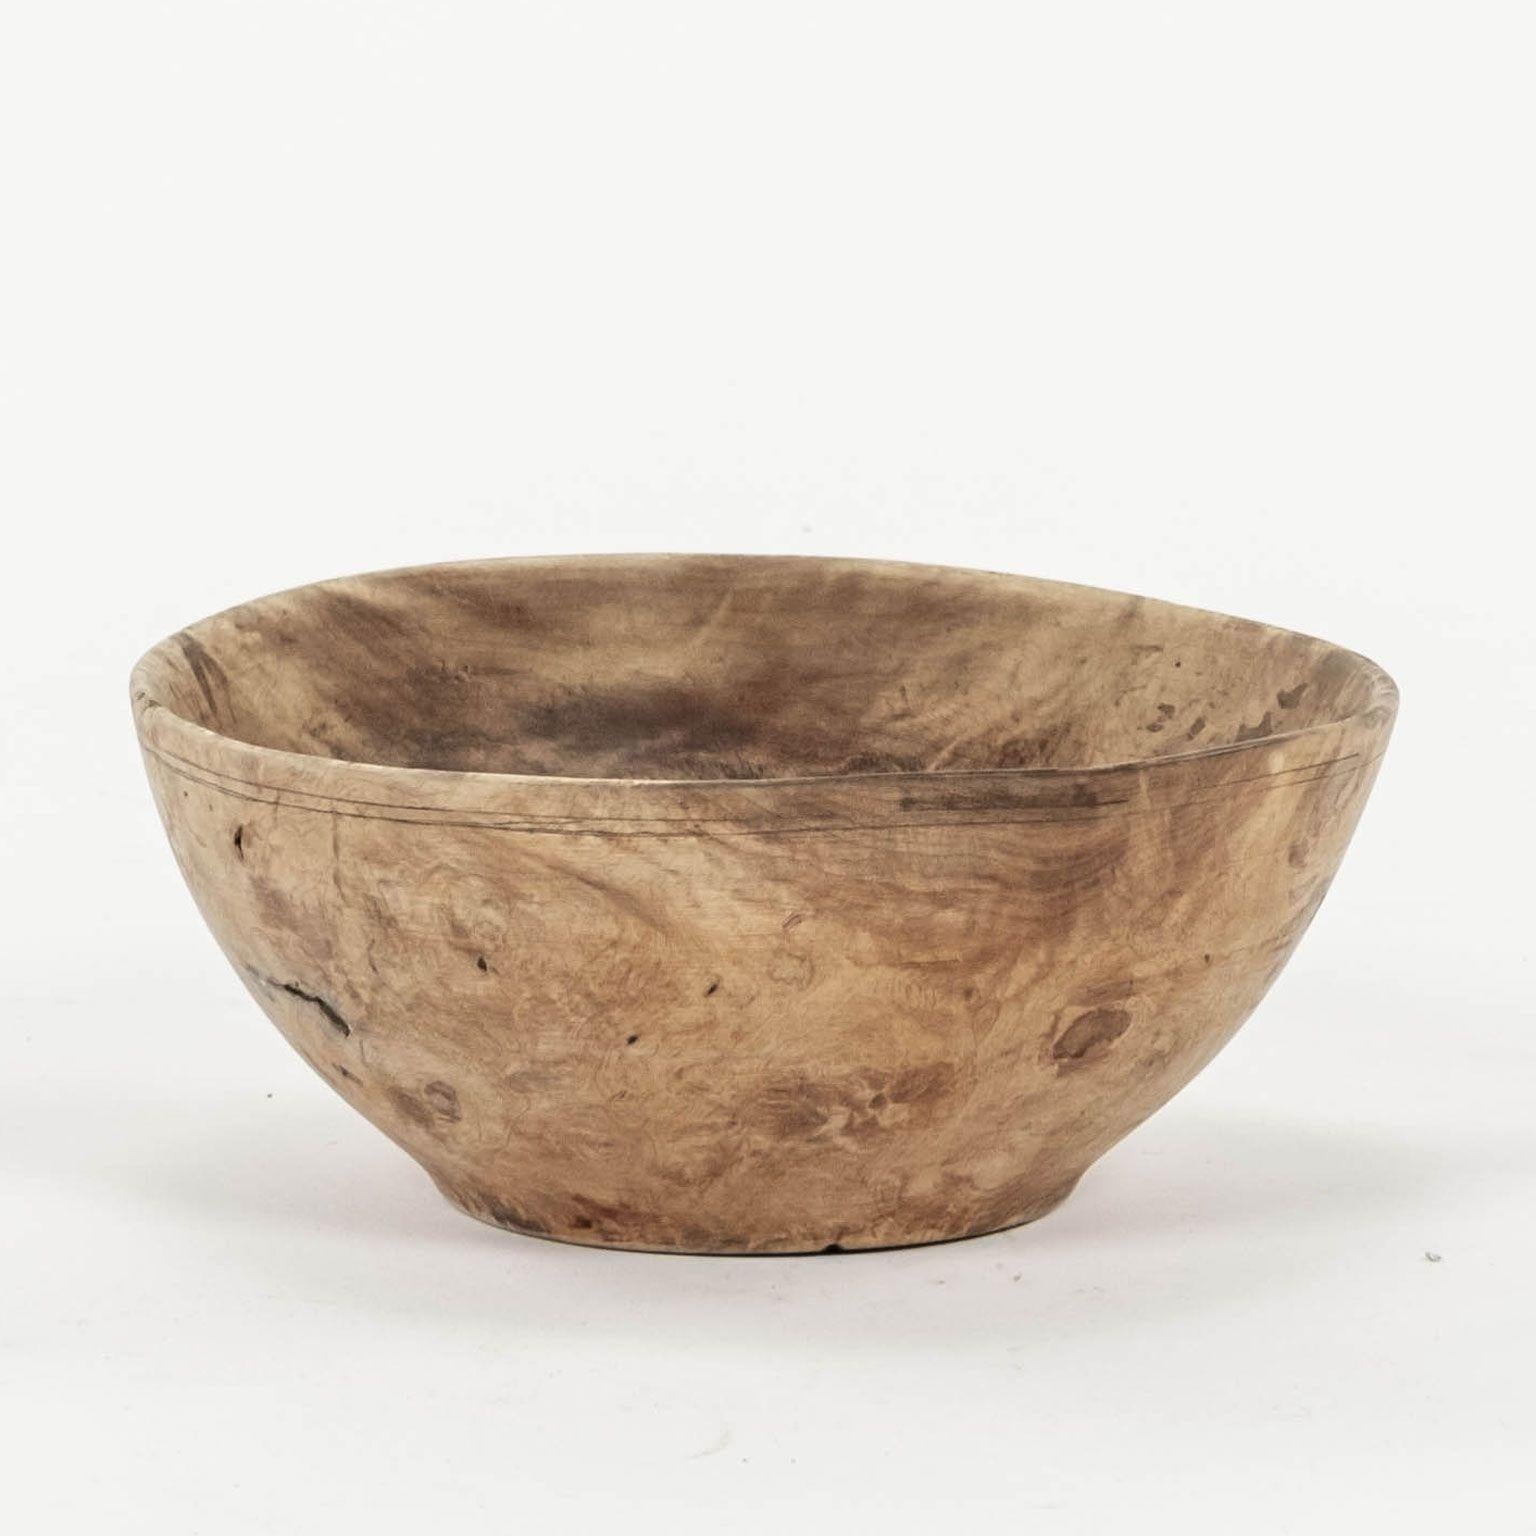 Gorgeous primitive Swedish burl rootwood bowl dating to the early 19th century. Beautifully organic burl wood grain patterns decorate surface of this bowl. Two old steel plug repairs enhance the bowl's charm and character.

Note: Original/early